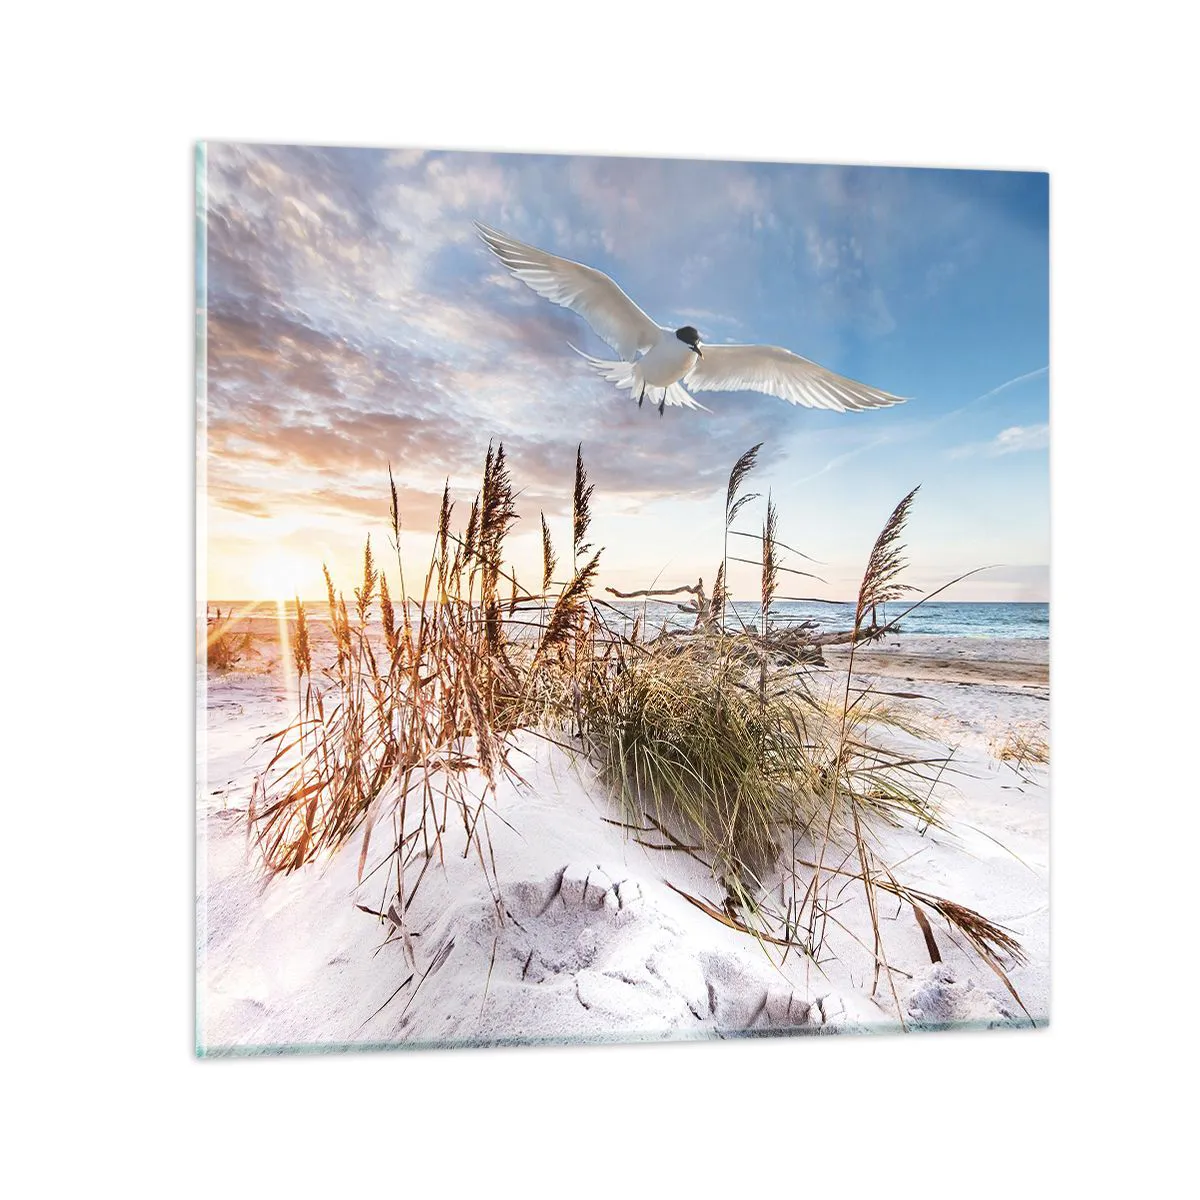 Glass picture  Arttor 60x60 cm - Wind from the Sea - Sea, Beach, Dune, Seagull, Nature, For living-room, For bedroom, White, Brown, Horizontal, Glass, GAC60x60-4902